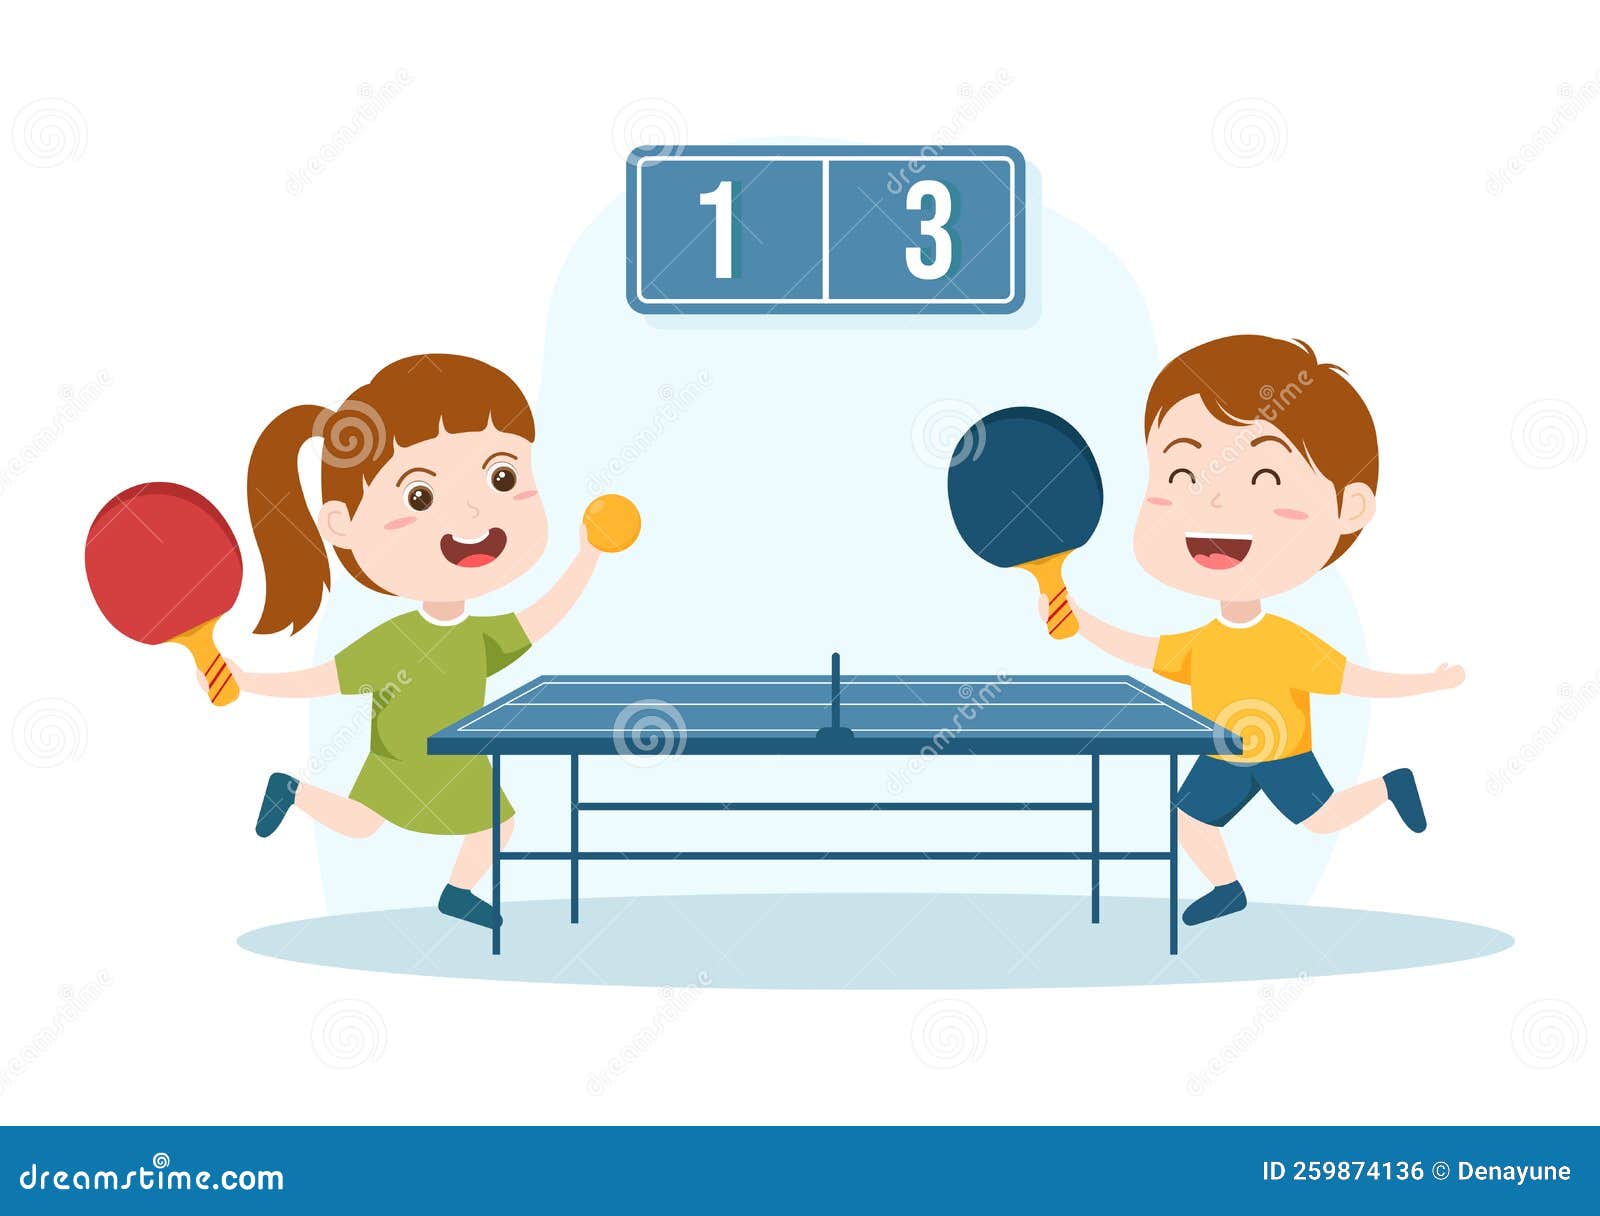 Cute Kids Playing Table Tennis Sports with Racket and Ball of Ping Pong Game Match in Flat Cartoon Hand Drawn Illustration Stock Vector